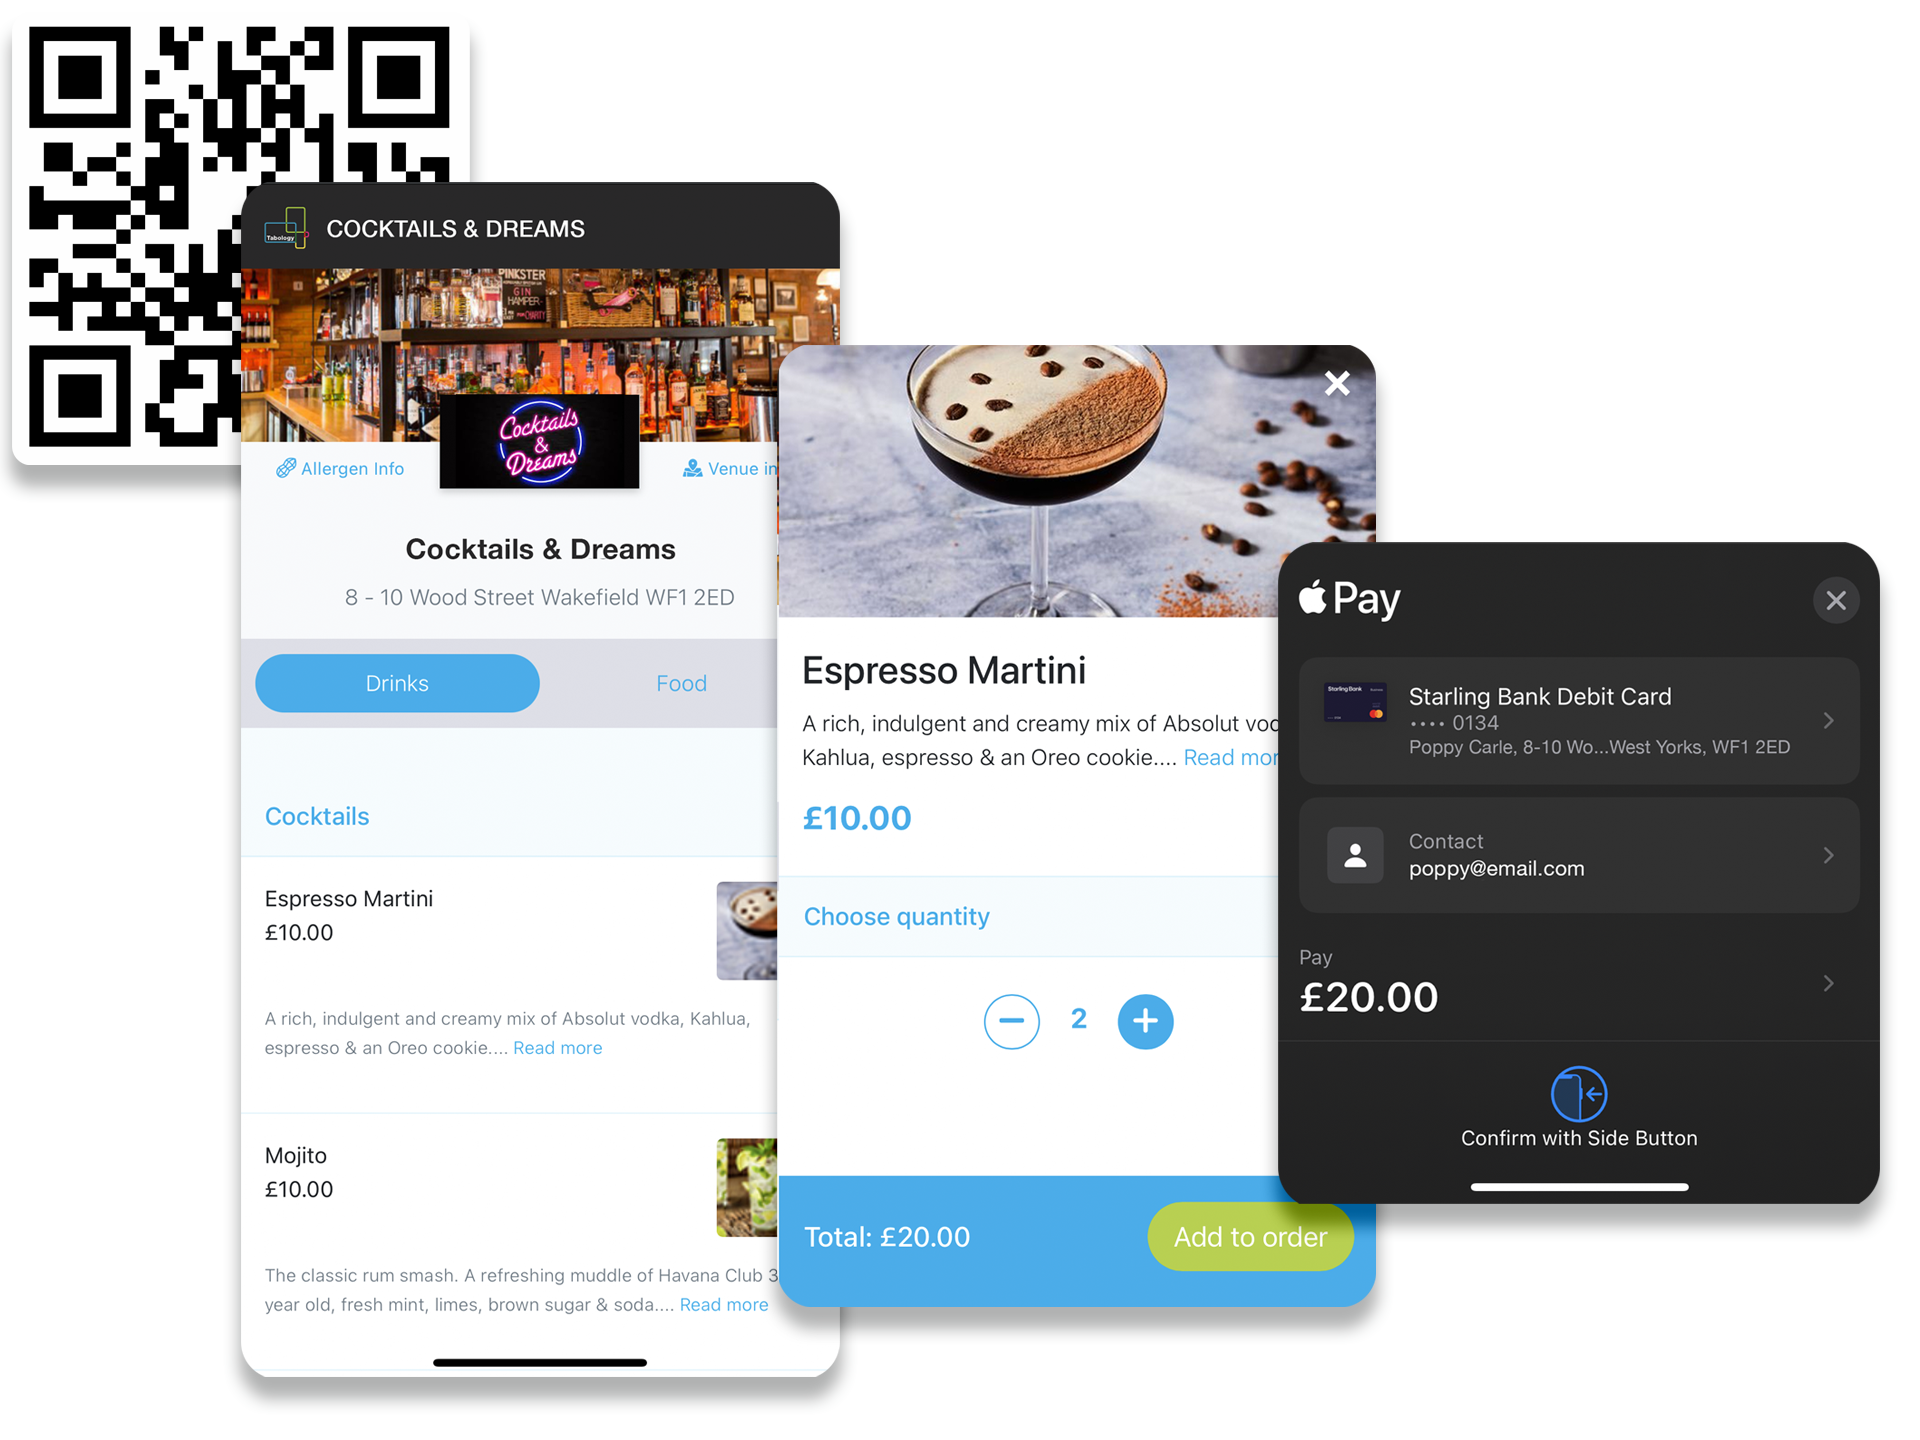 Instant mobile ordering, scan QR code, view menu, order & pay with Apple Pay